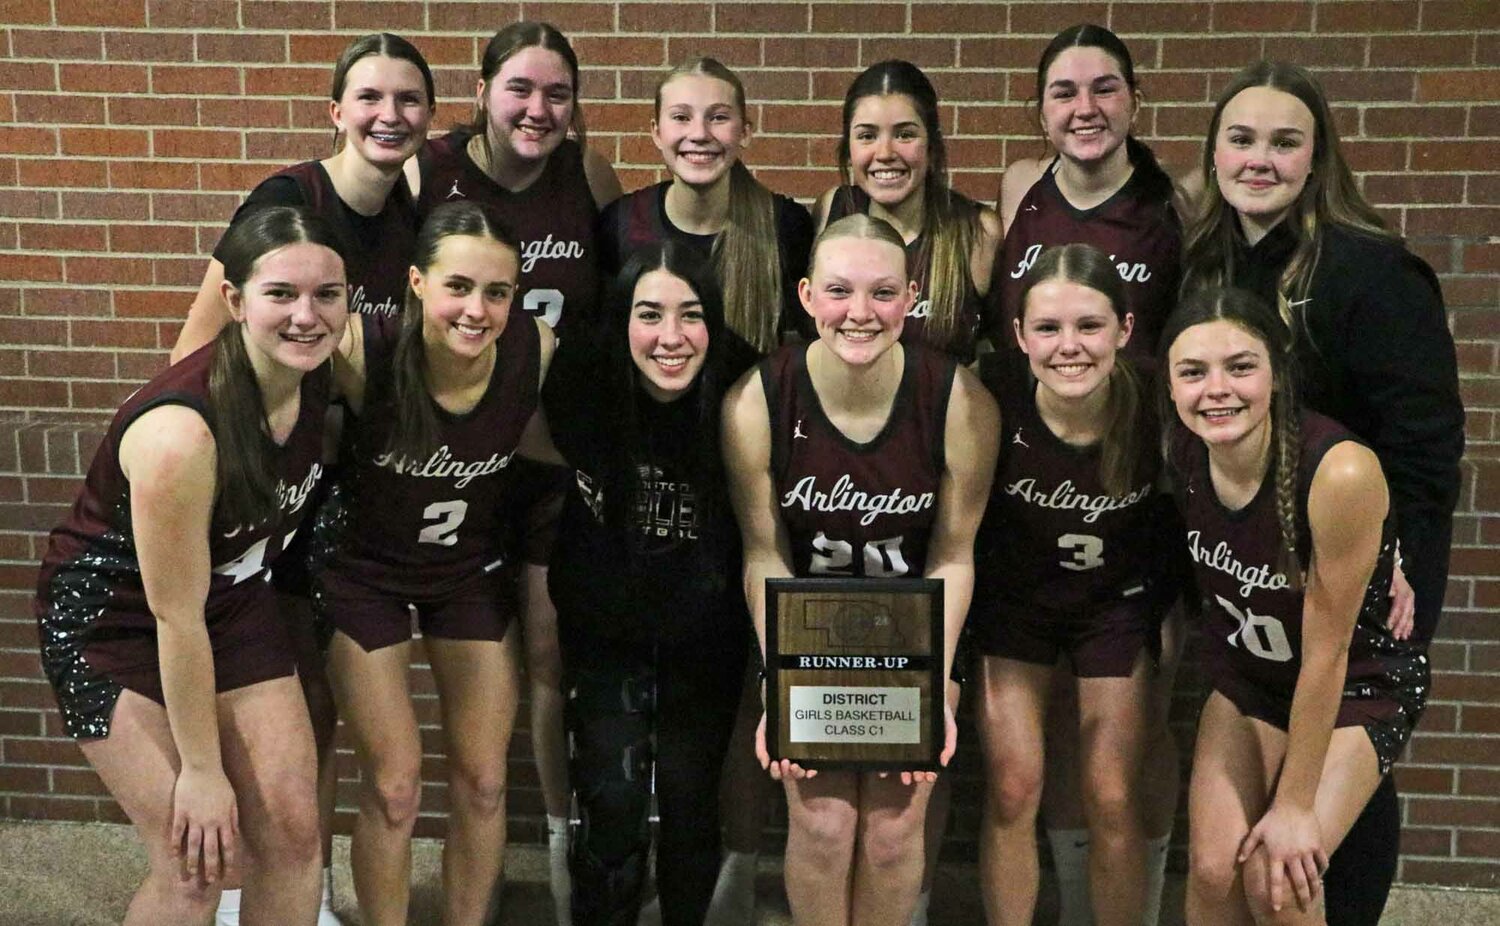 The Arlington girls basketball team poses for a photo with their Class C1 District Finals runner-up plaque Friday at Adams Central. Front row, from left: Gracen Adams, Emme Timm, Libby Hegemann, Austyn Flesner, Erika Cruikshank and Hailey O'Daniel. Back row: Britt Nielsen, Hayley Arp, Macy Wolf, Valeria Carvajal, Taylor Arp and Leah Franzluebbers.